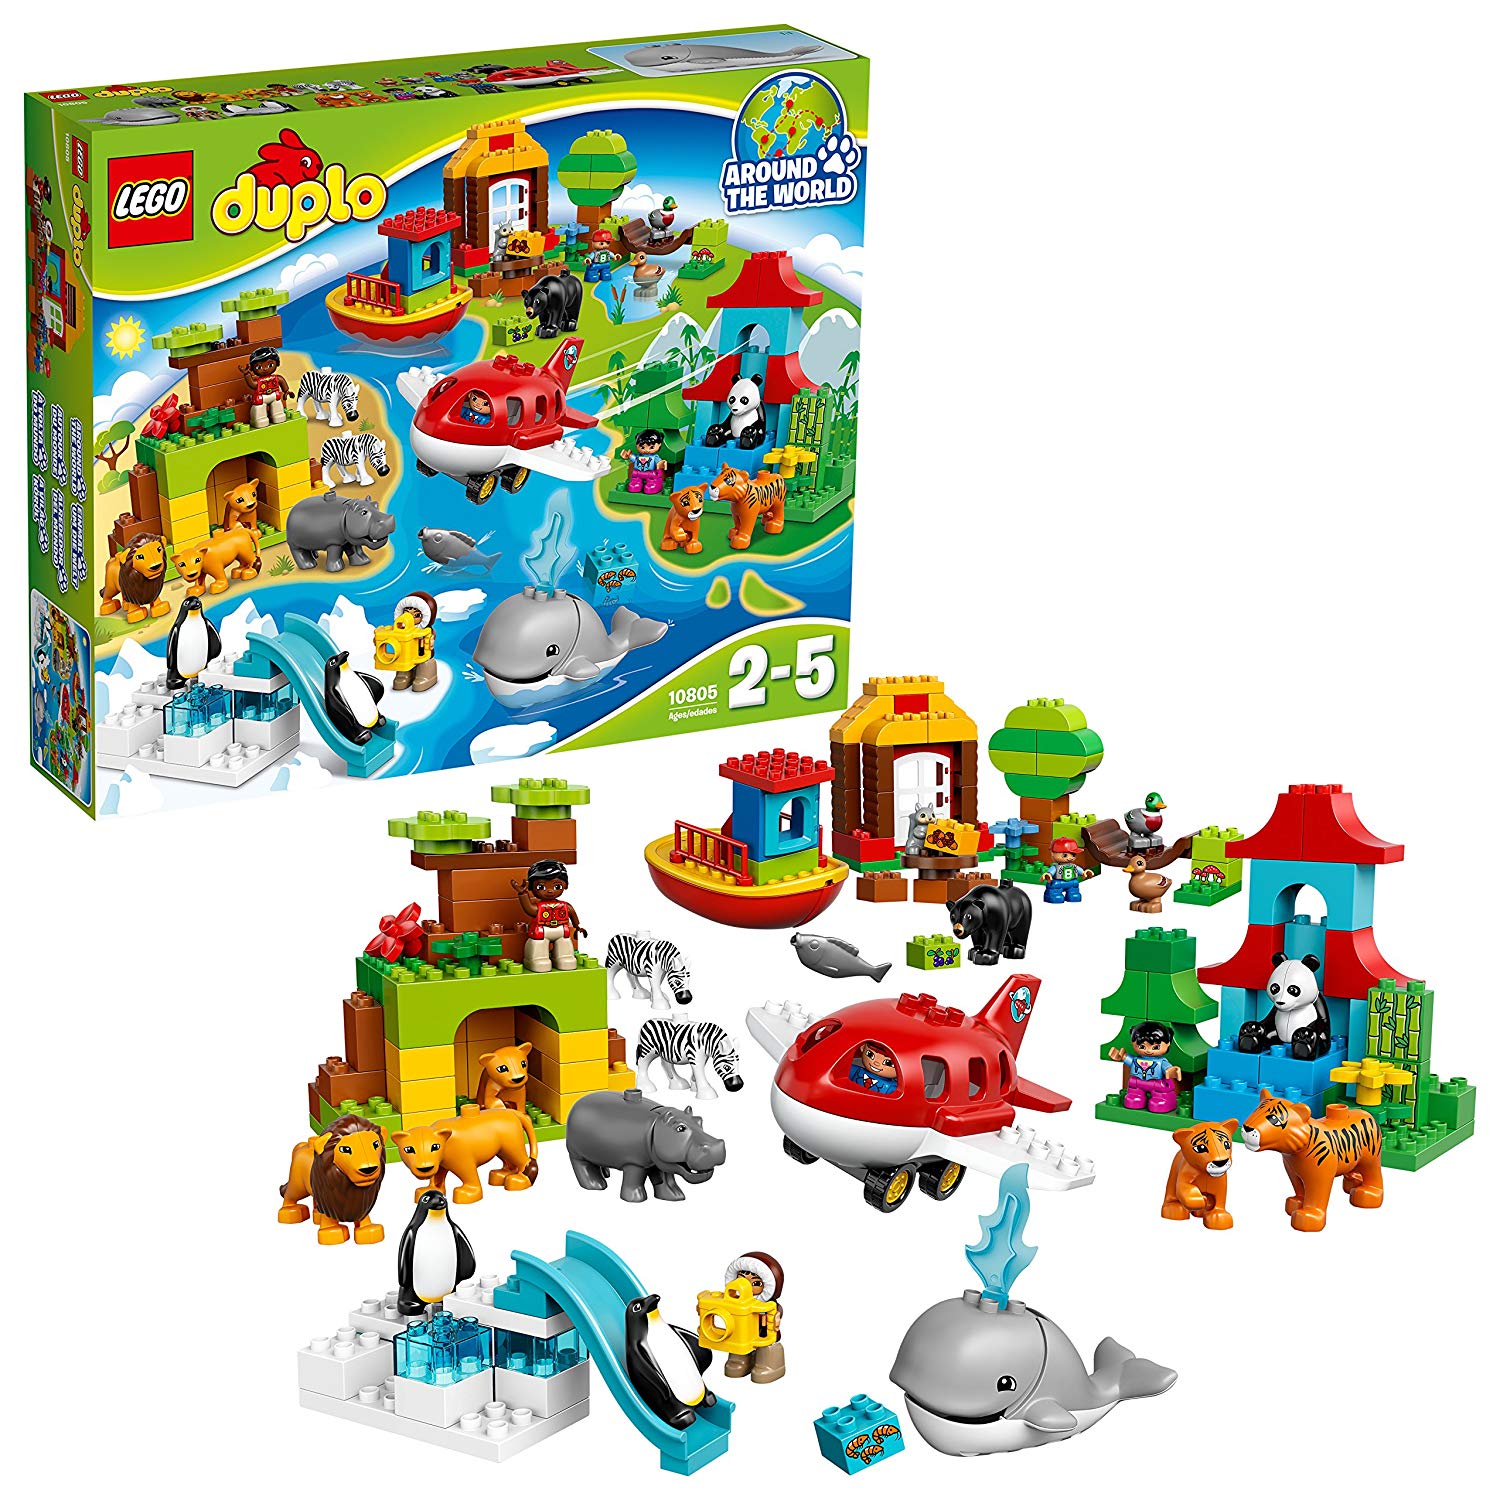 Lego® Duplo® 10805 – Once Around The World By Lego